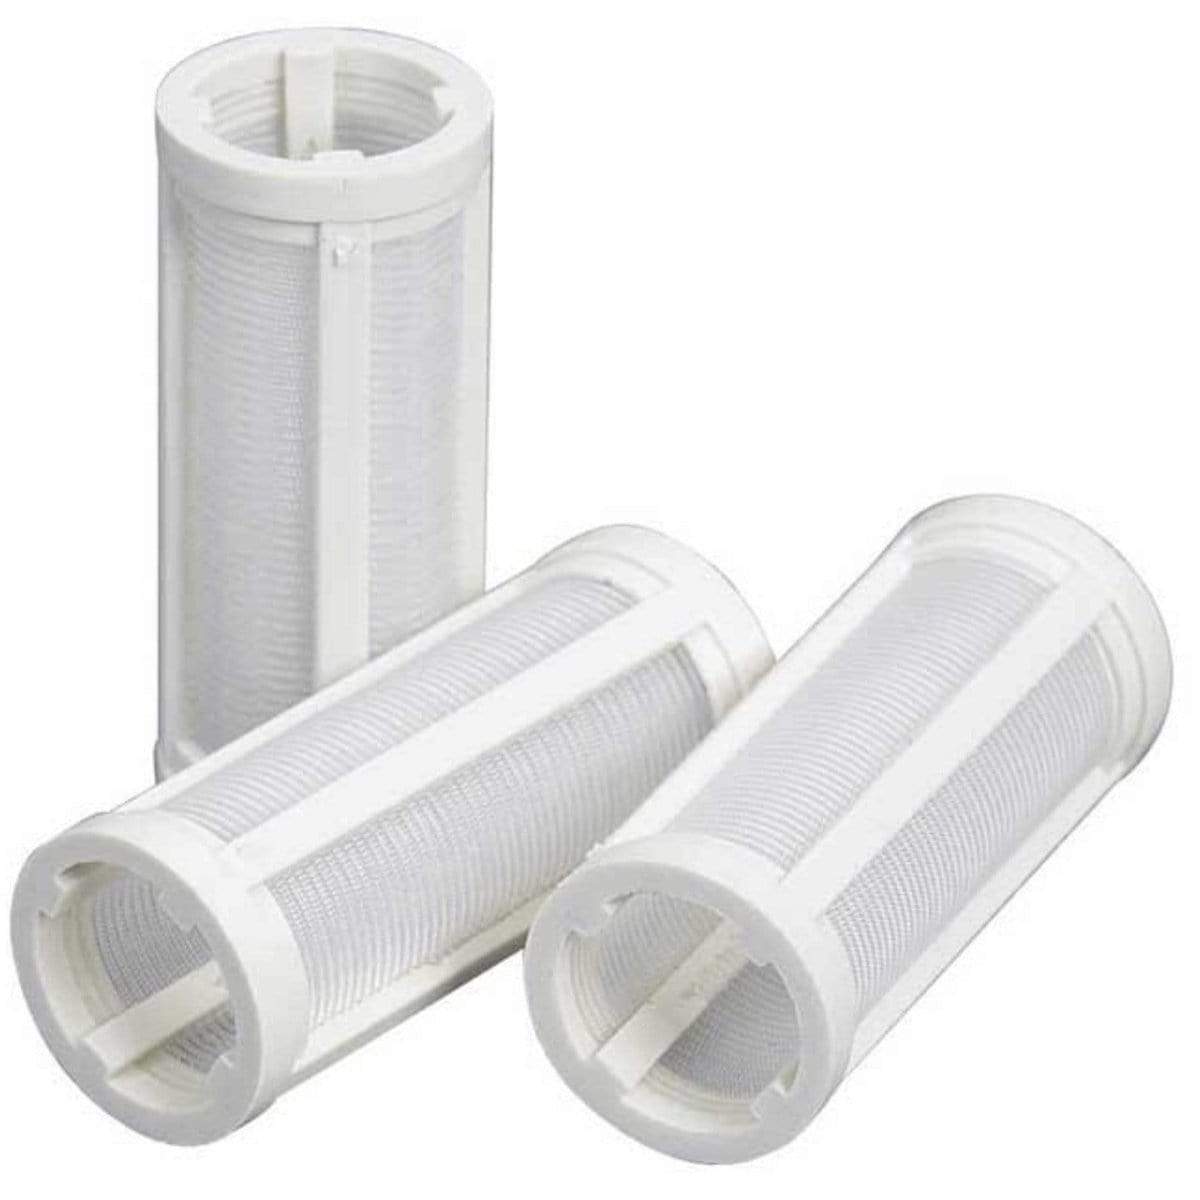 Moeller Qualifies for Free Shipping Moeller Replacement Glass Filters 3-Pk #033318-10